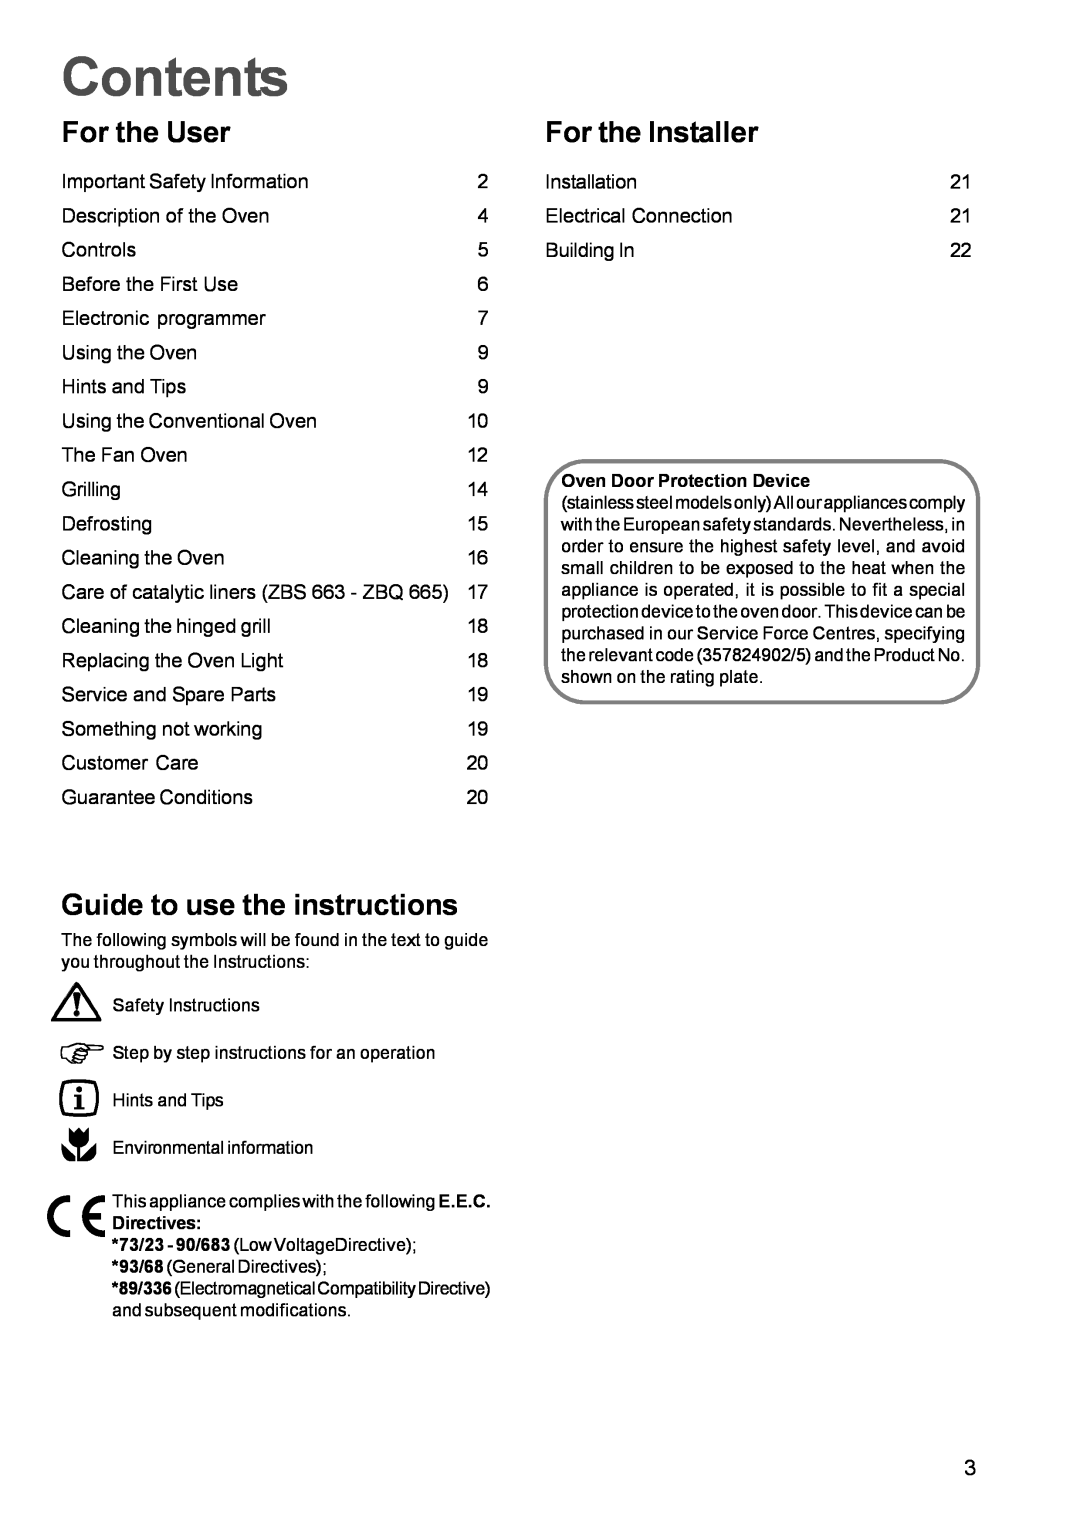 Zanussi ZBQ 665, ZBF 660 manual Contents, For the User, Guide to use the instructions, For the Installer 